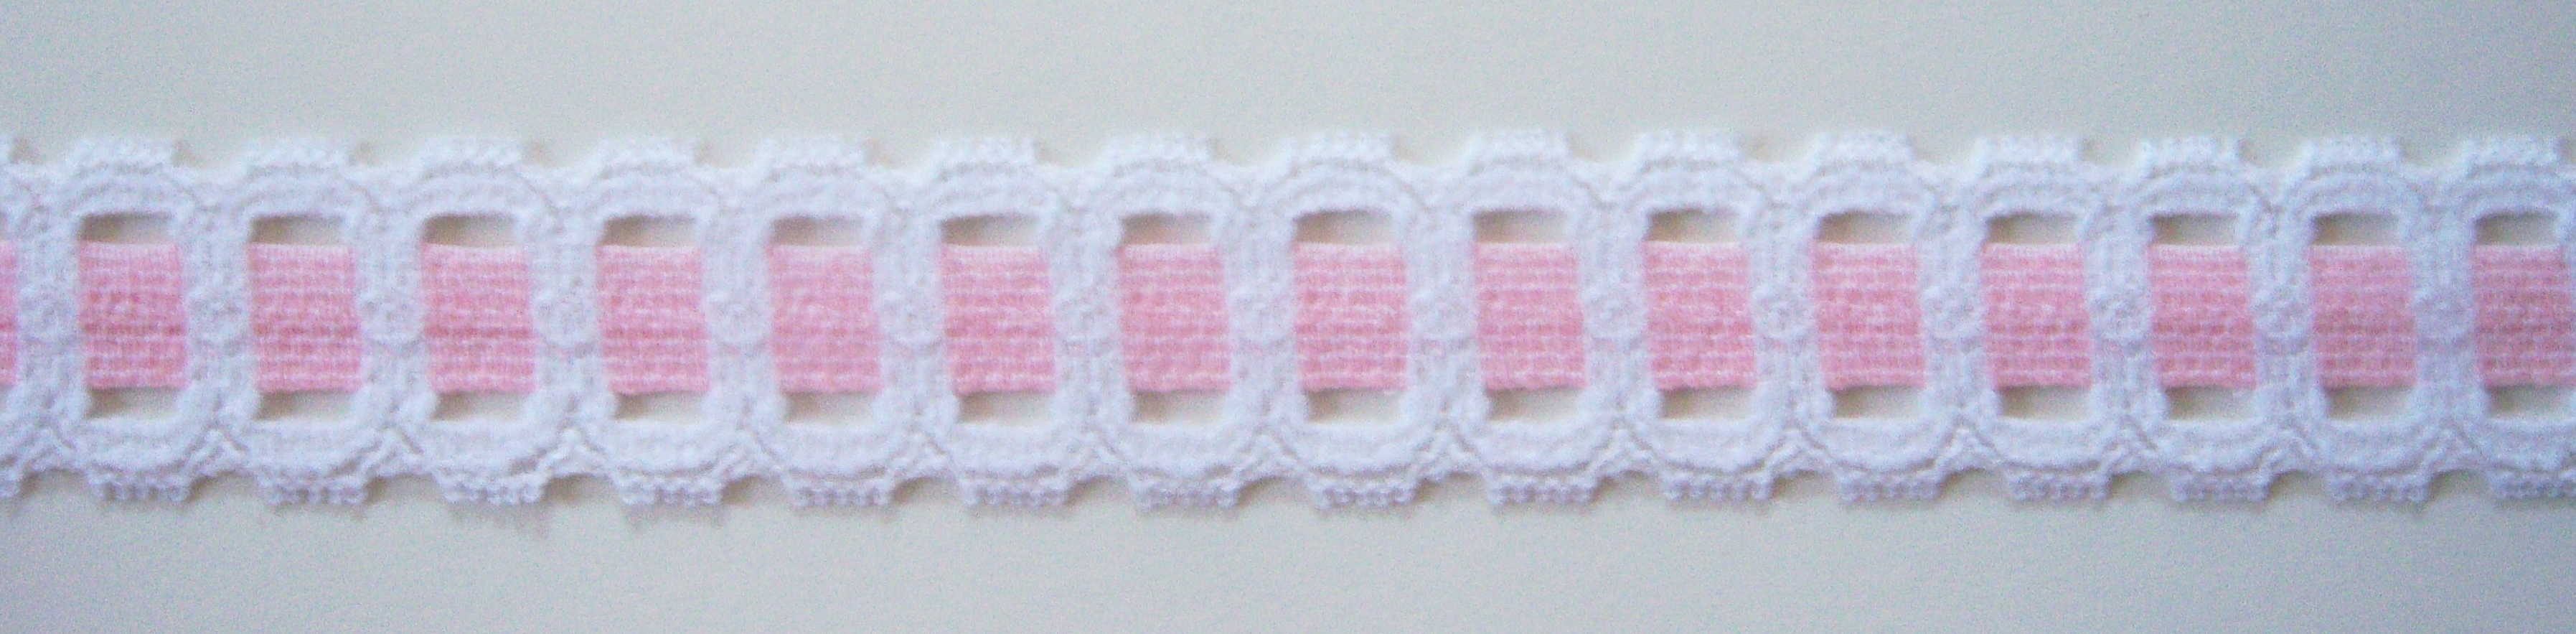 White/Pink 1 1/8" Stretch Lace